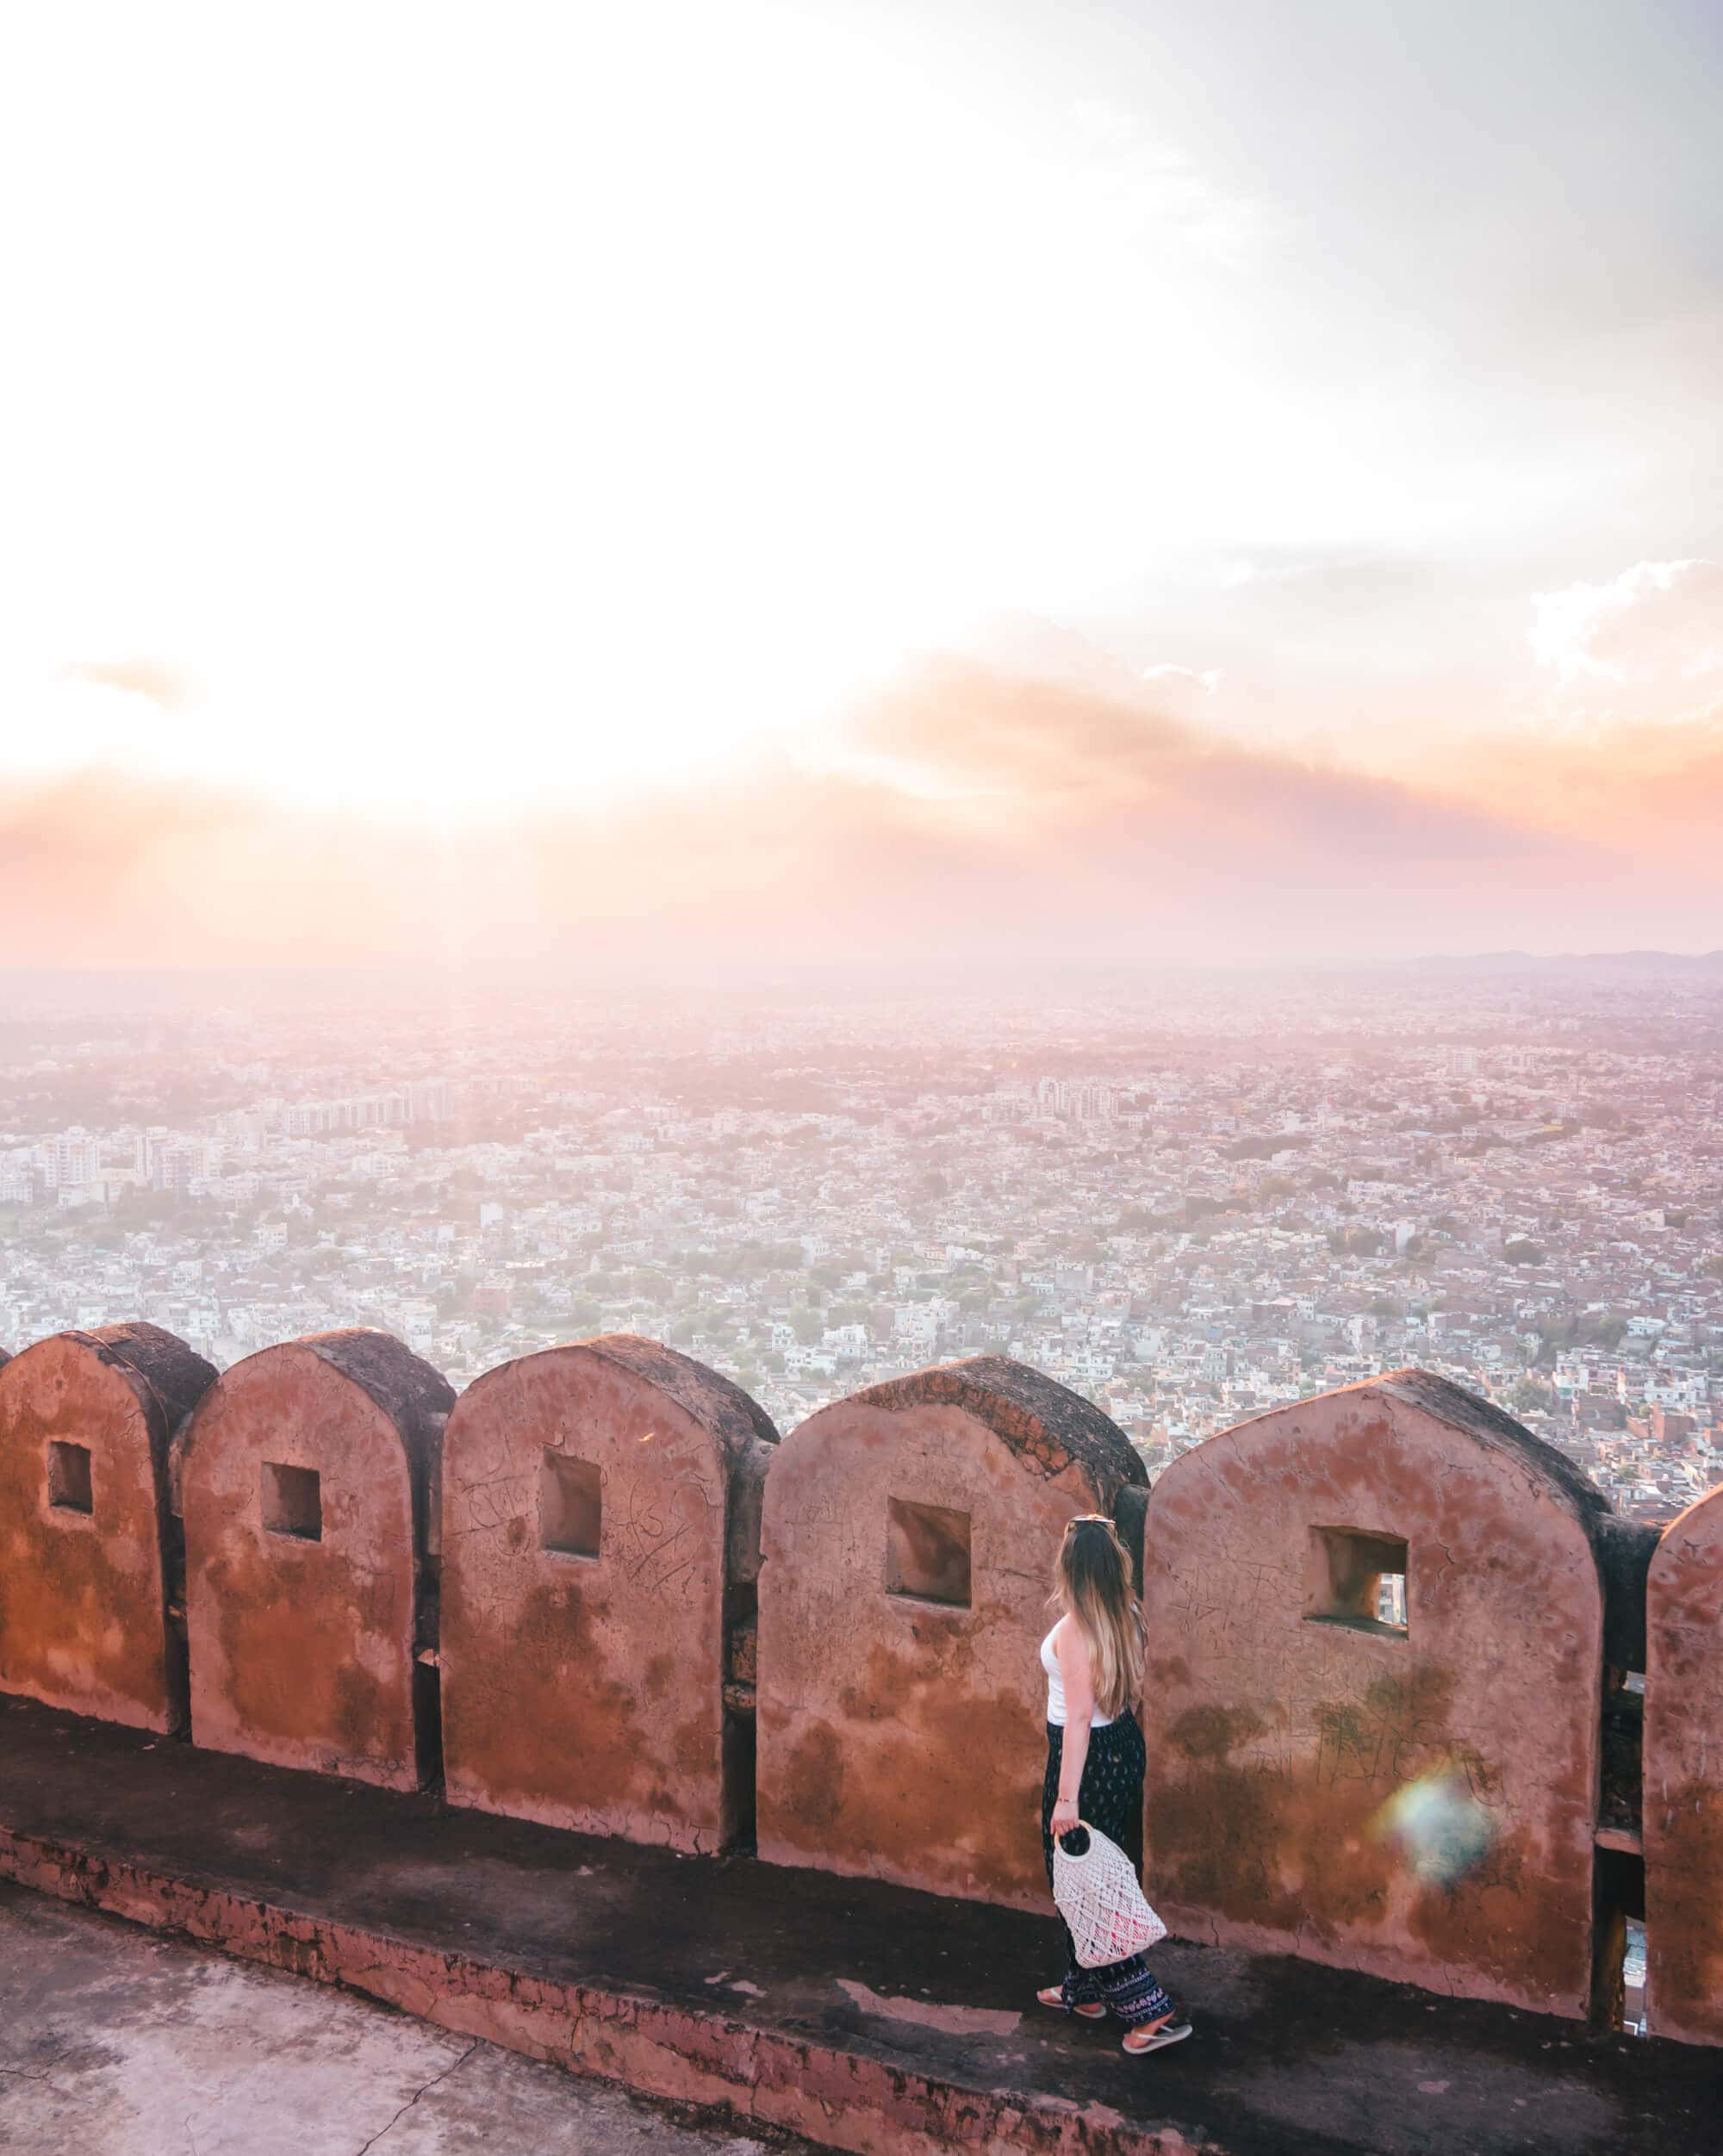 How to spend 2 days in Jaipur - sunset at Nahargarh Fort